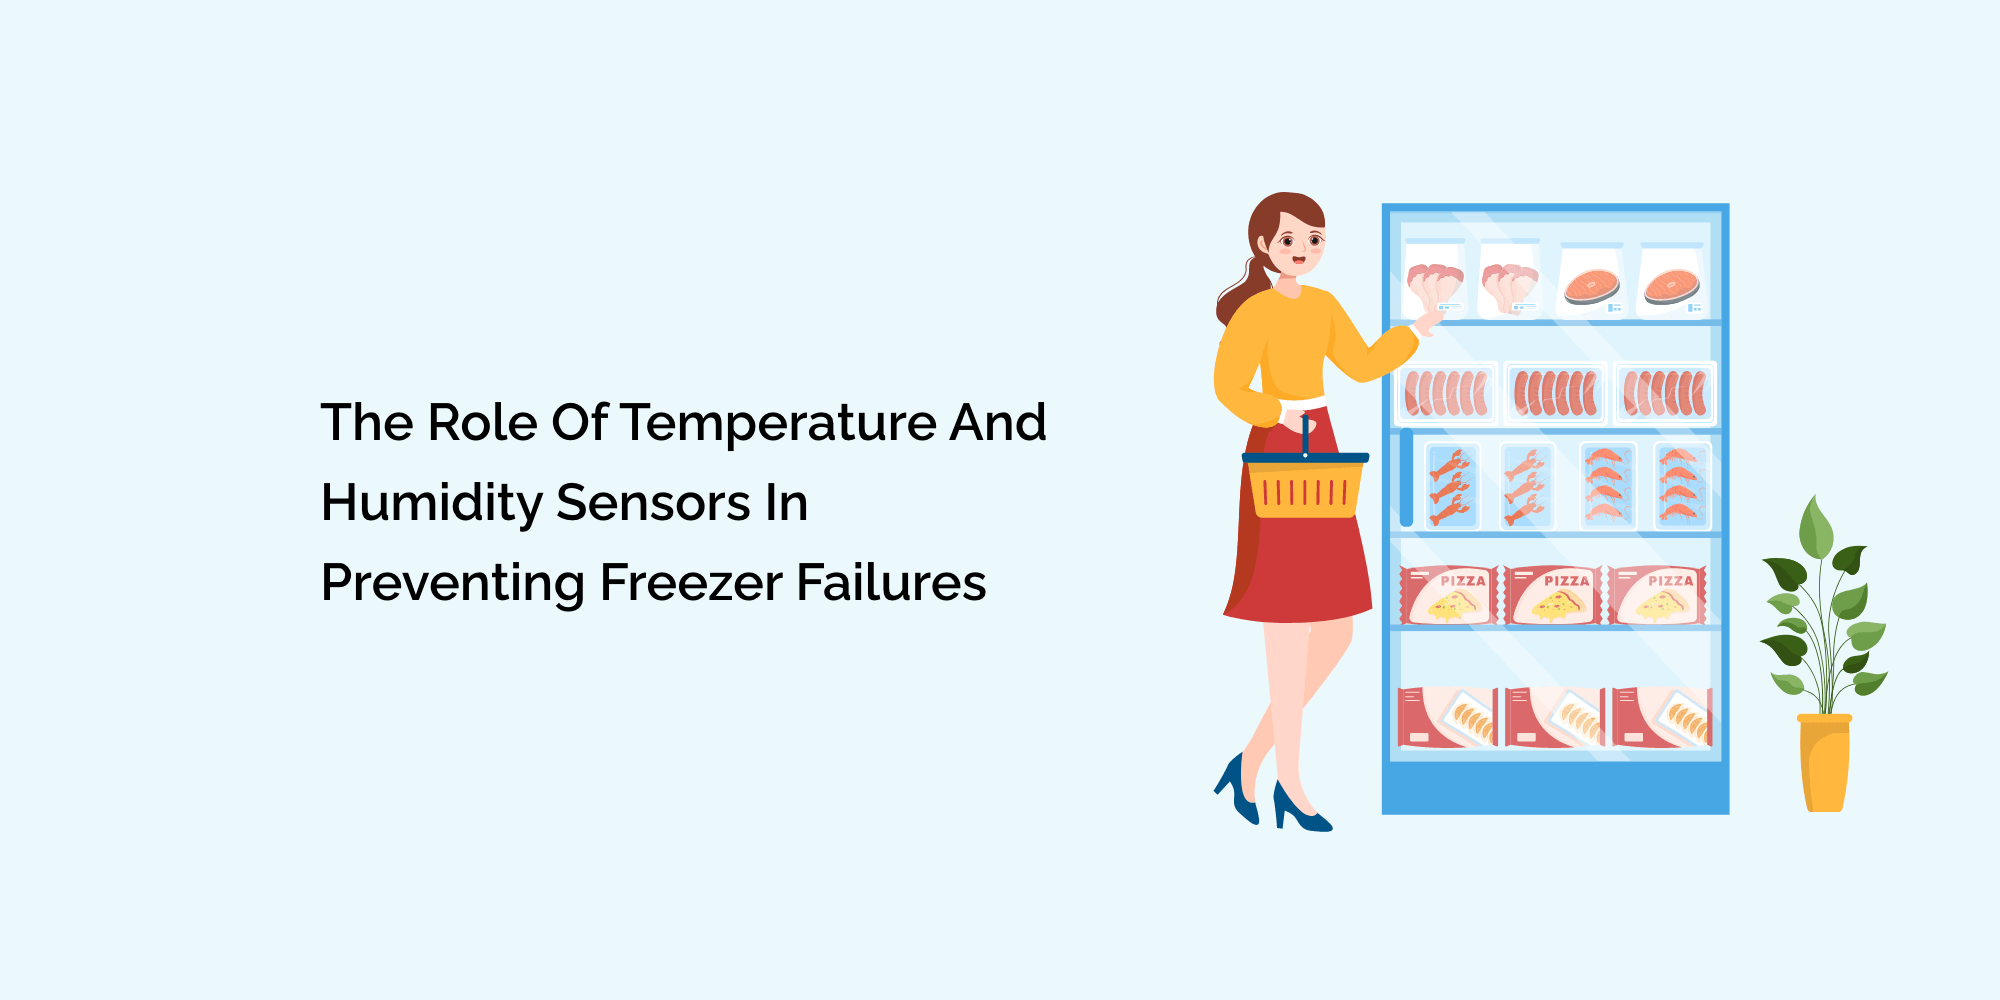 The Role of Temperature and Humidity Sensors in Preventing Freezer Failures